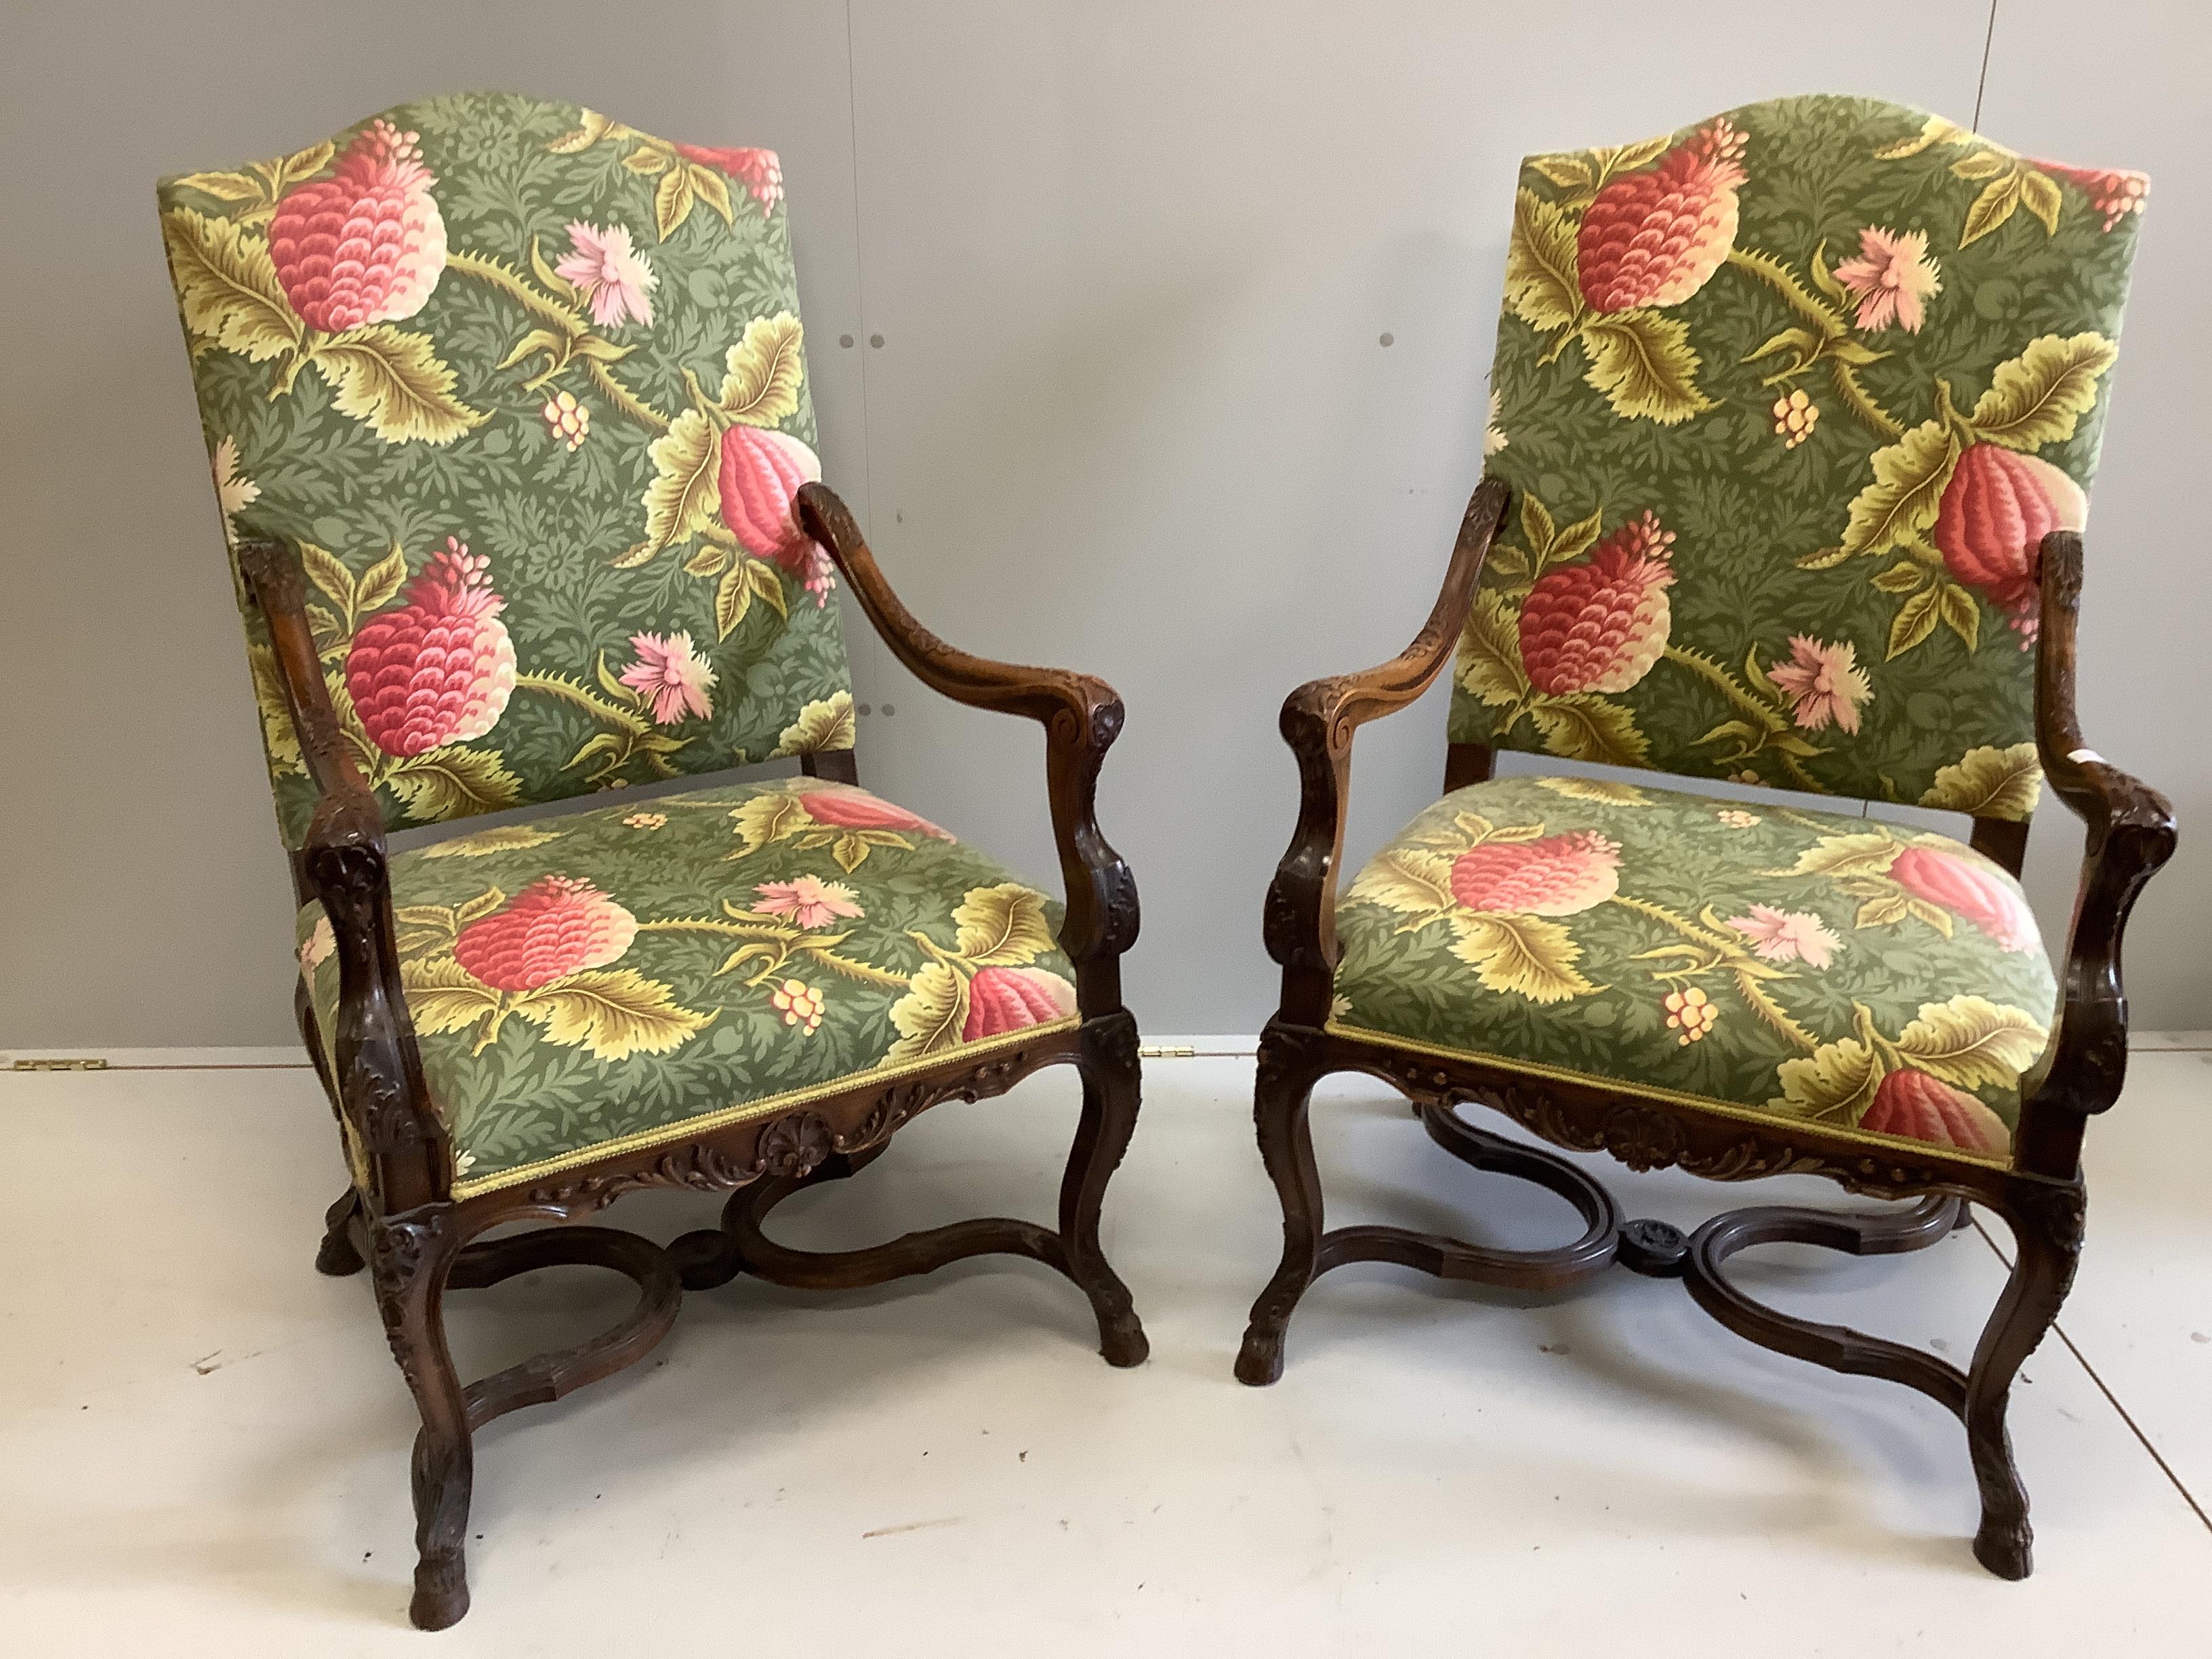 A pair of 18th century style French walnut elbow chairs, width 70cm, depth 60cm, height 116cm